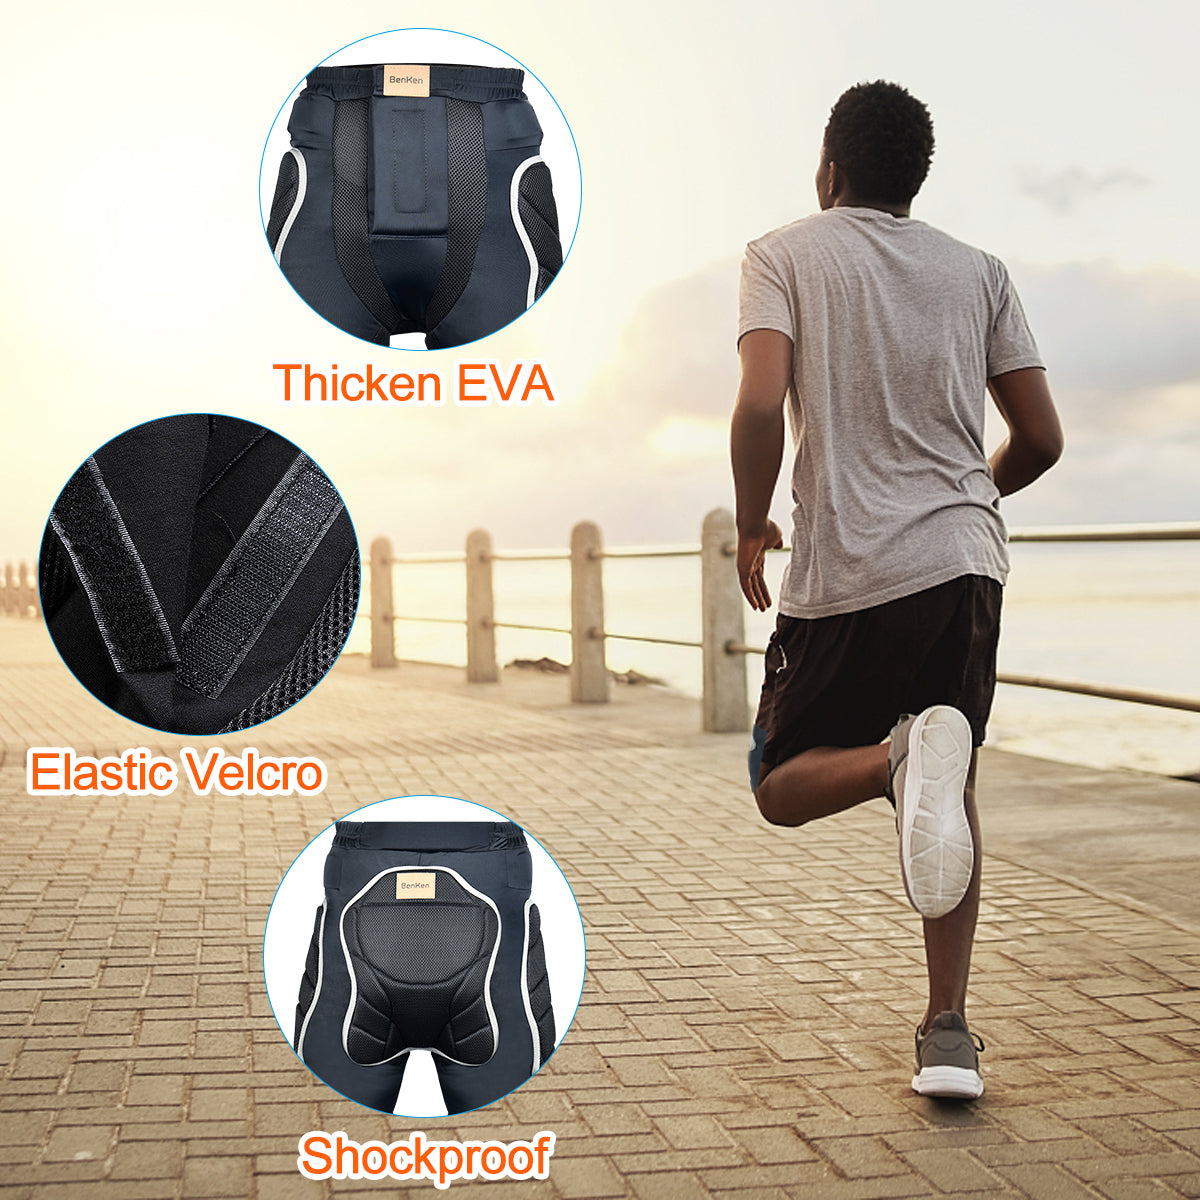 BenKen Protective Padded Shorts,3D EVA Impact Protective Gear for  Snowboard,Skate and Ski Cycling Underwear Shorts